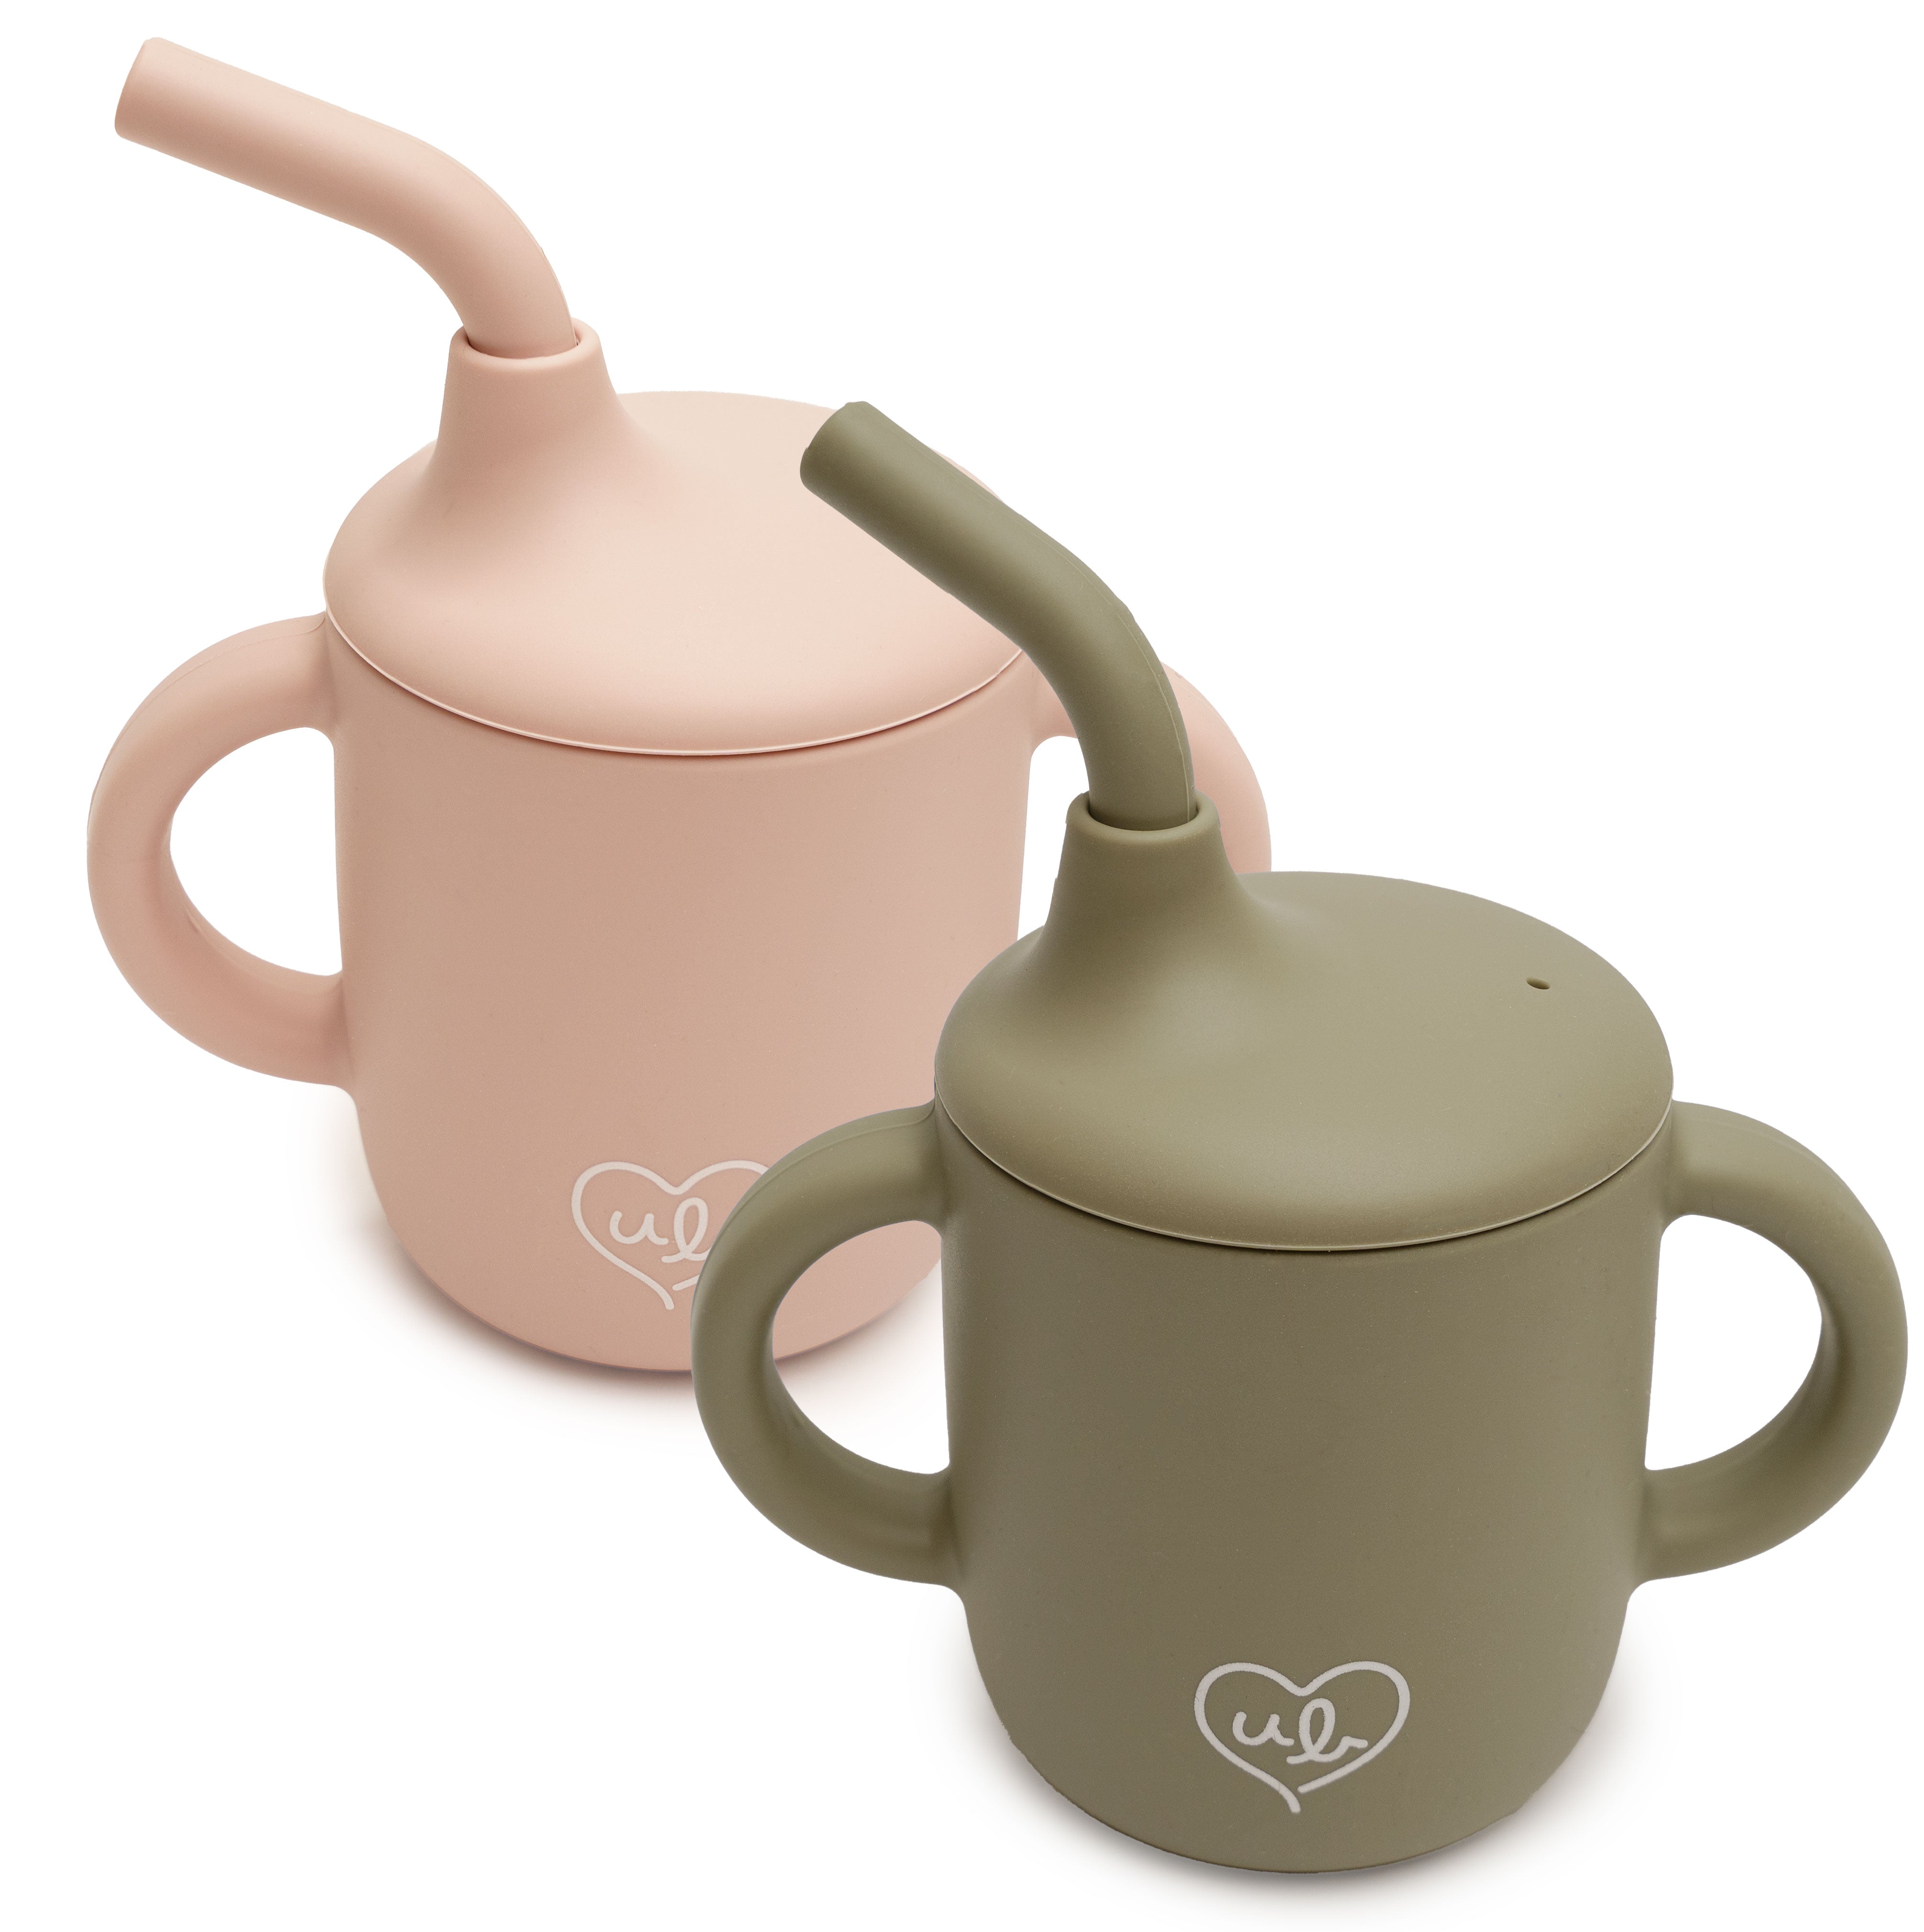 Sippy Cup Set of 3 (Beige)